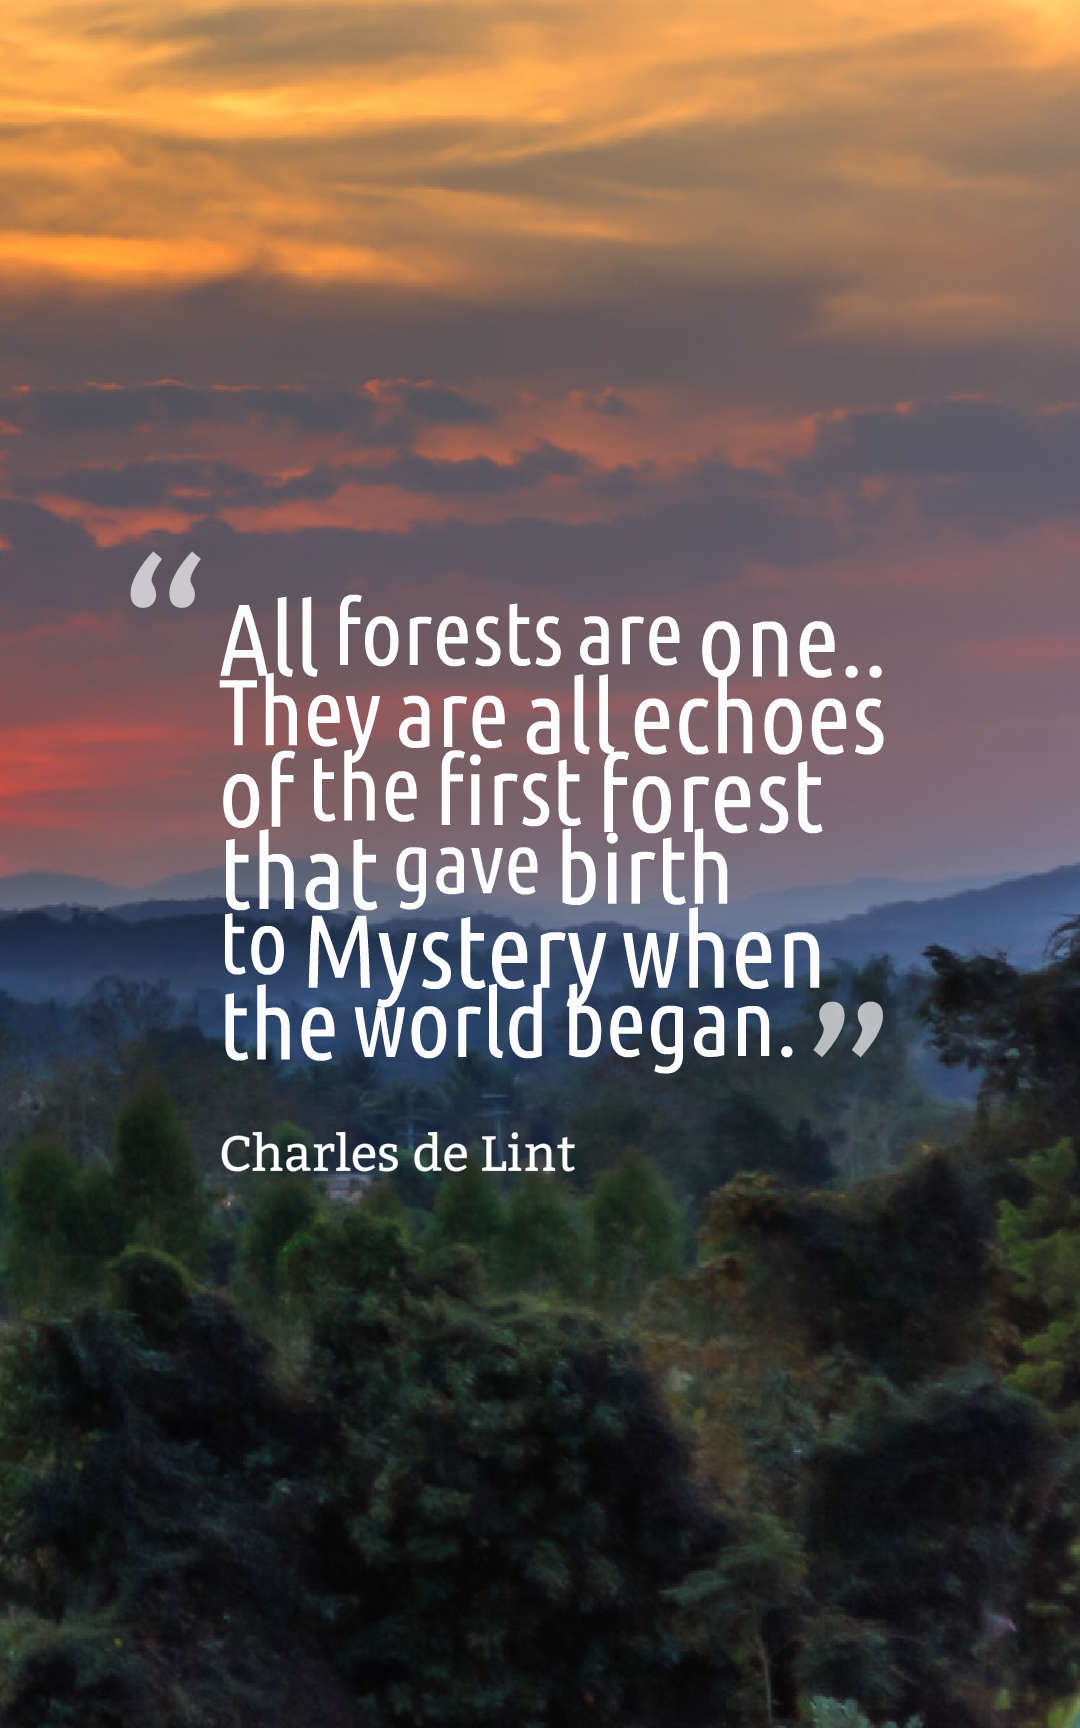 All forests are one... They are all echoes of the first forest that gave birth to Mystery when the world began.